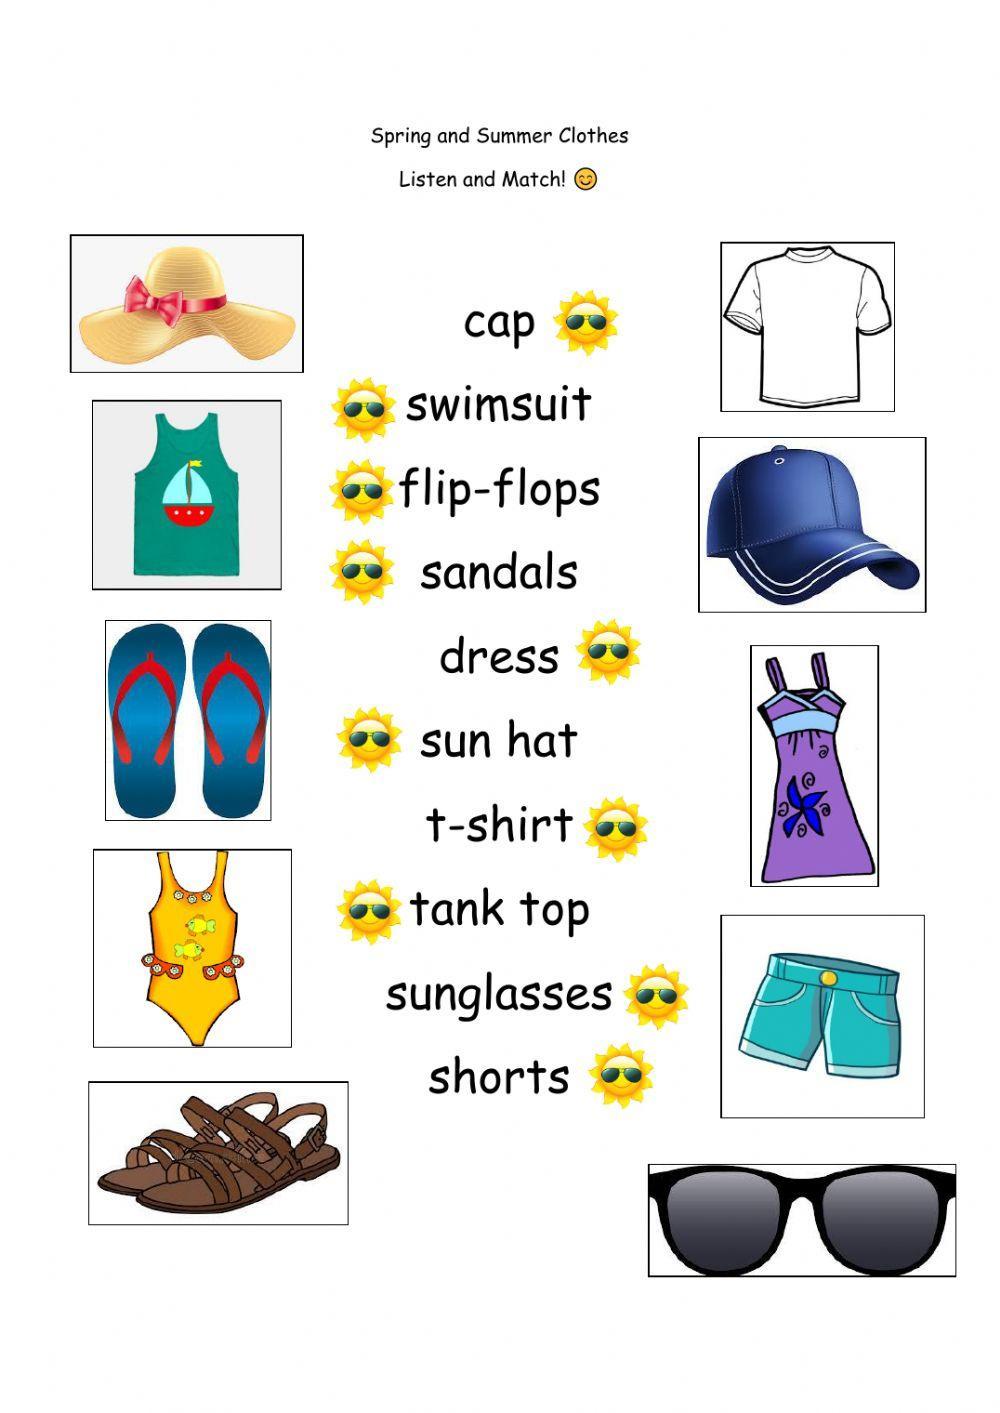 Spring and Summer Clothes Vocabulary